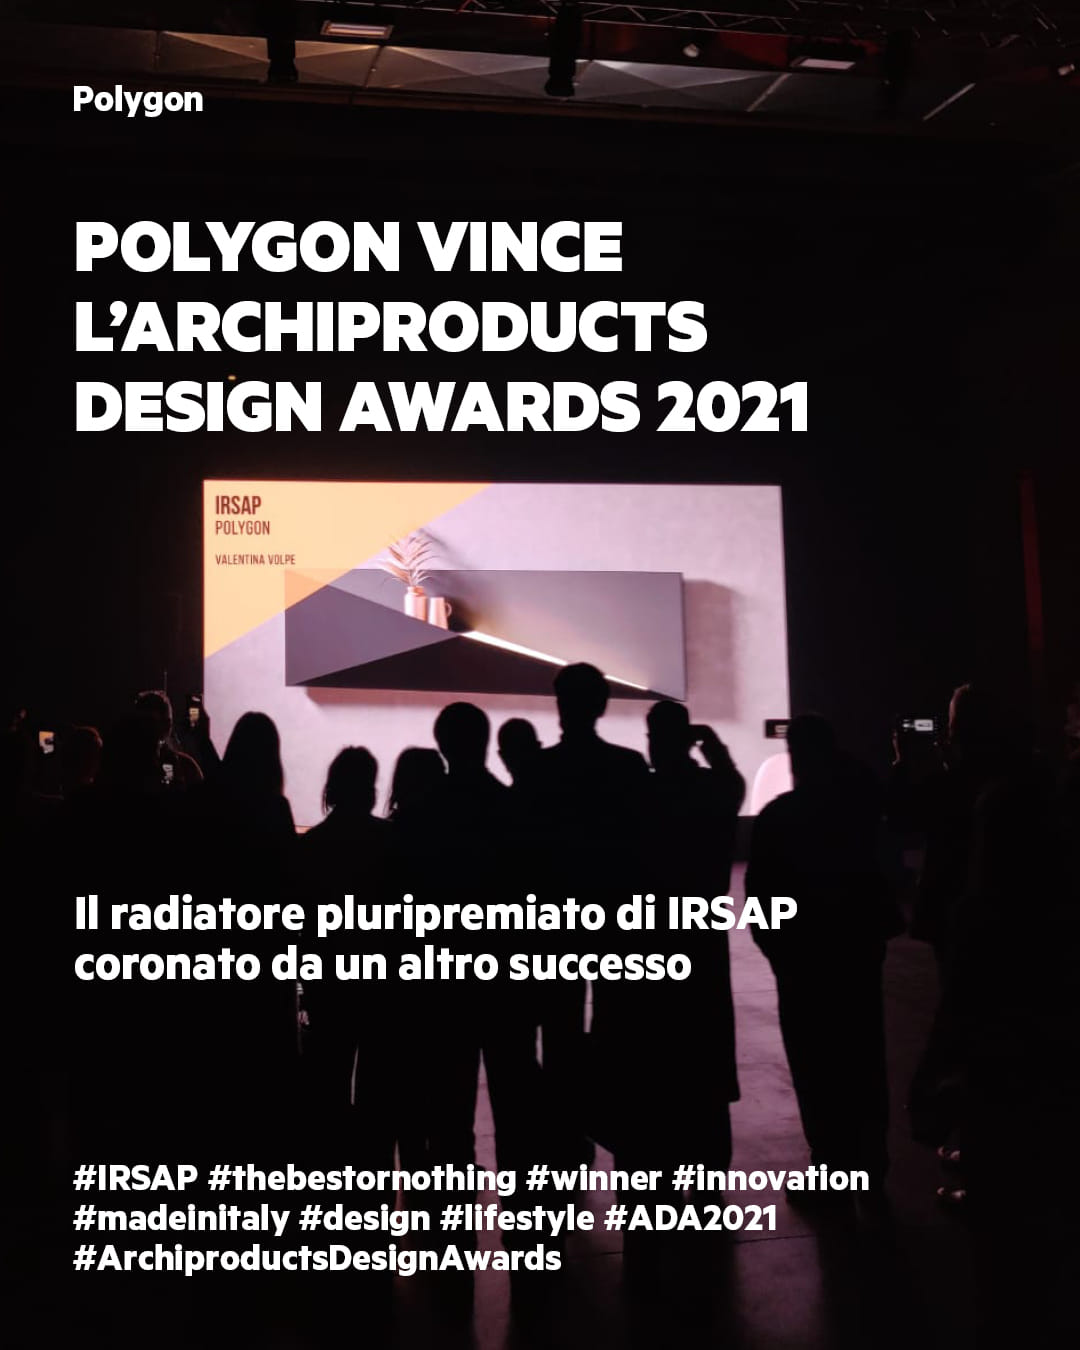 Polygon vince l’Archiproducts Design Awards 2021